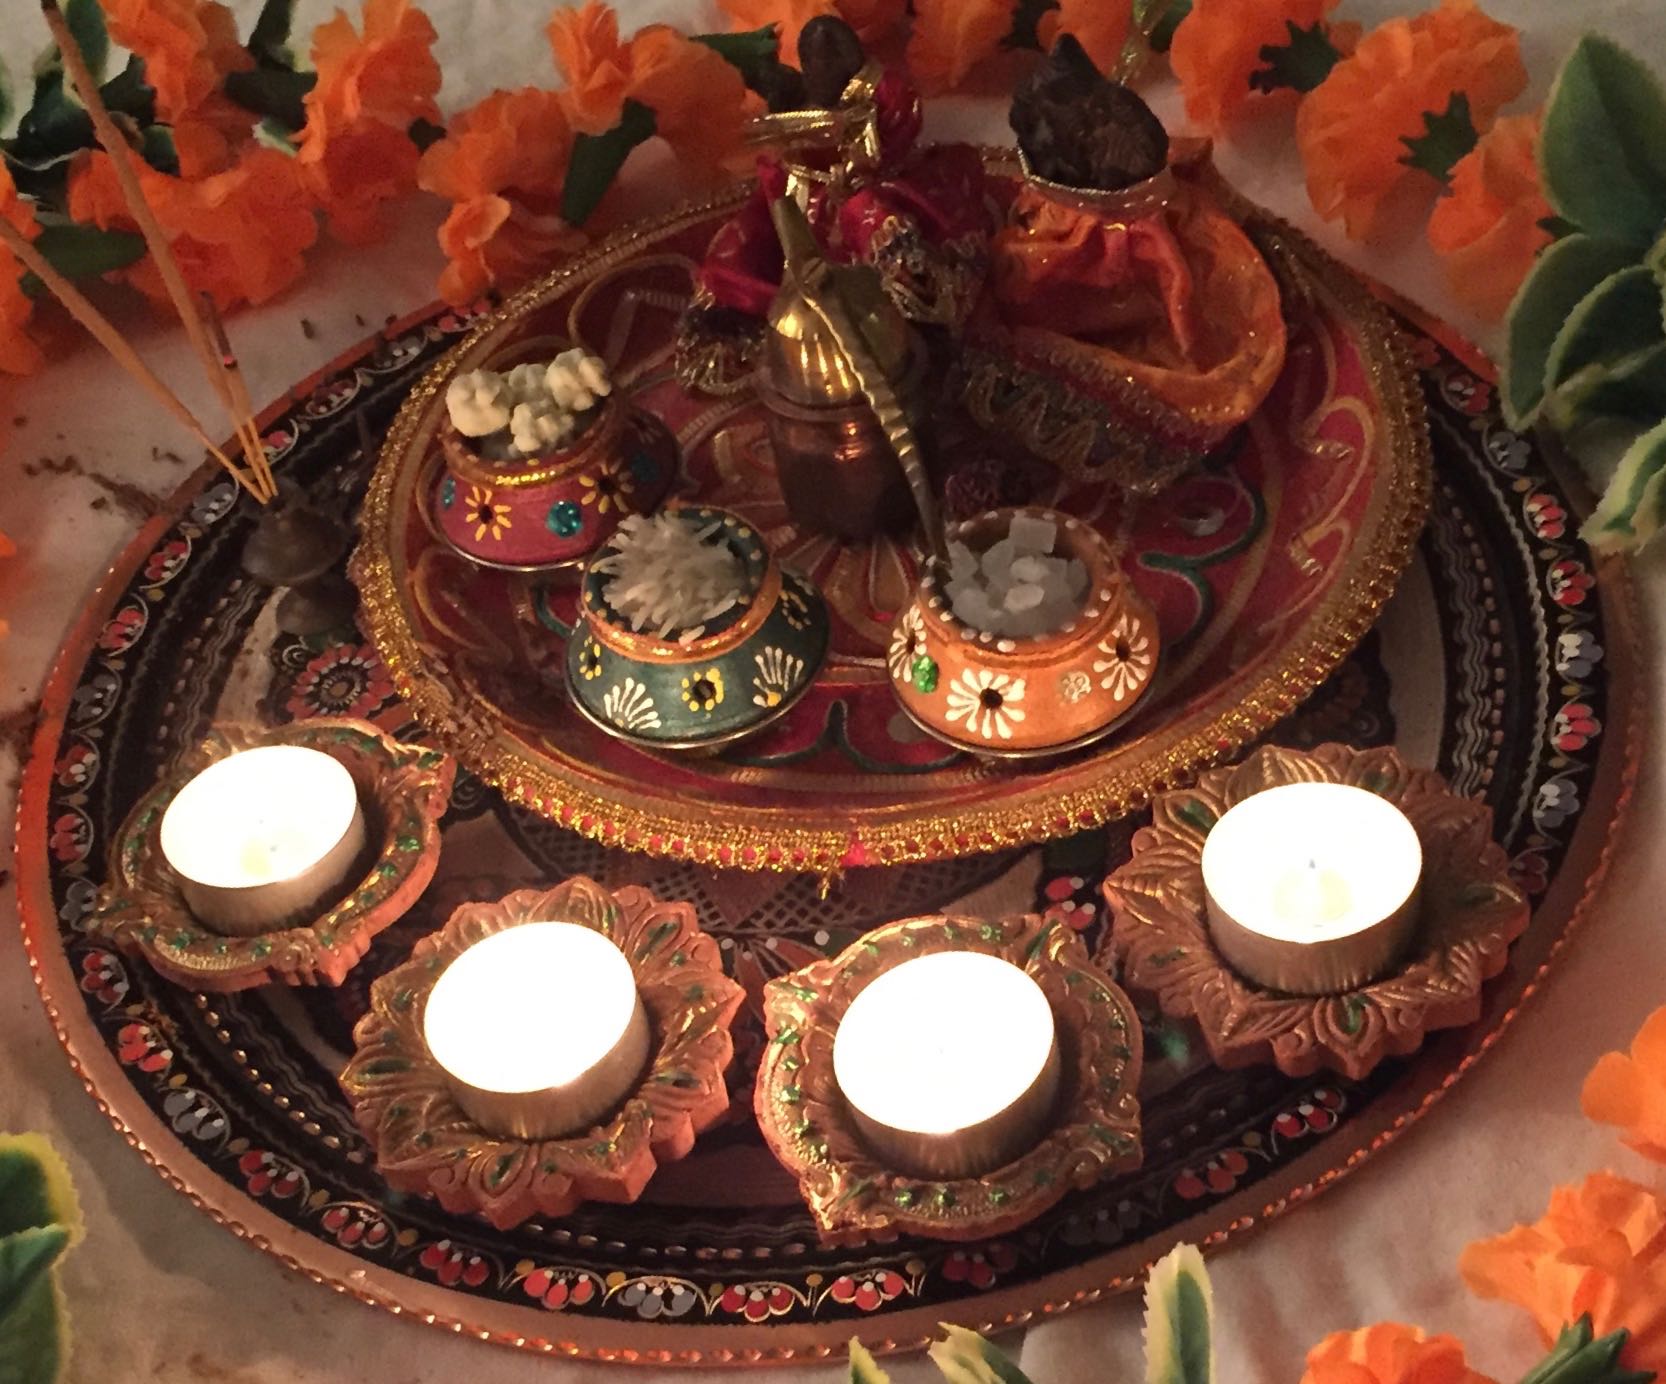 It's the weekend! Number 225, Offerings at a Diwali Celebration